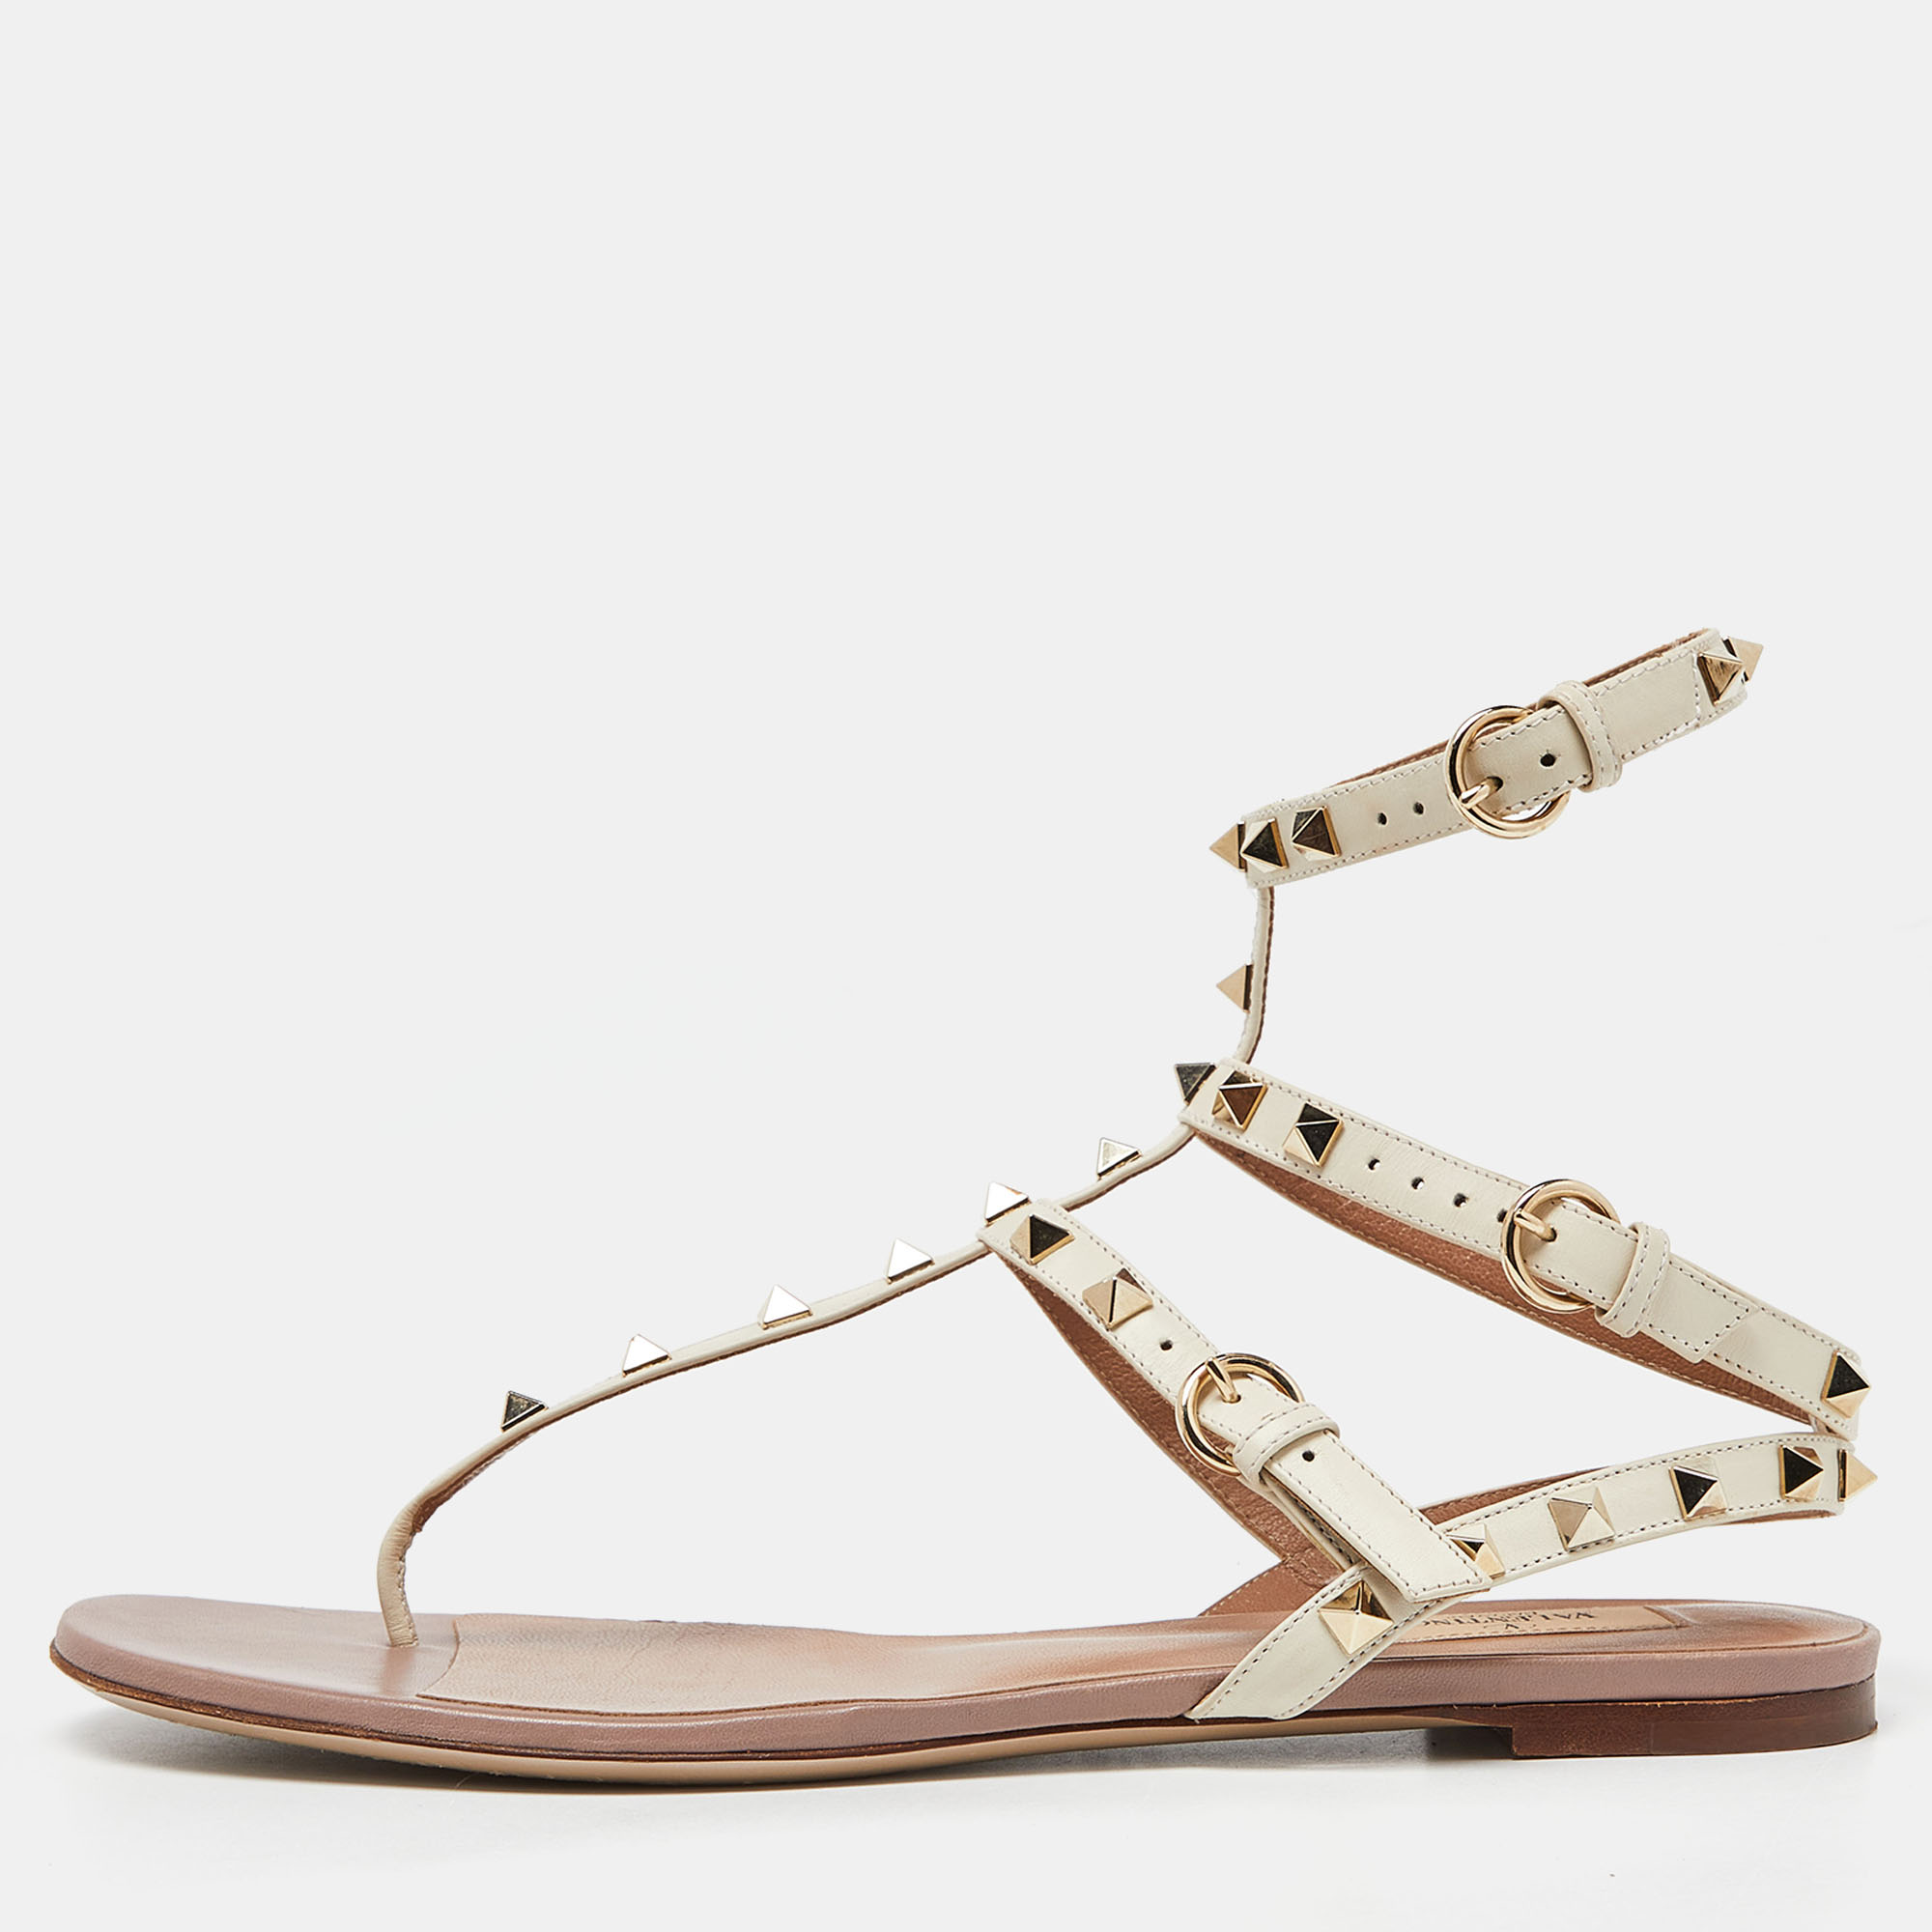 Valentino Cream Leather Rockstud Ankle Strap Flat Sandals Size 41